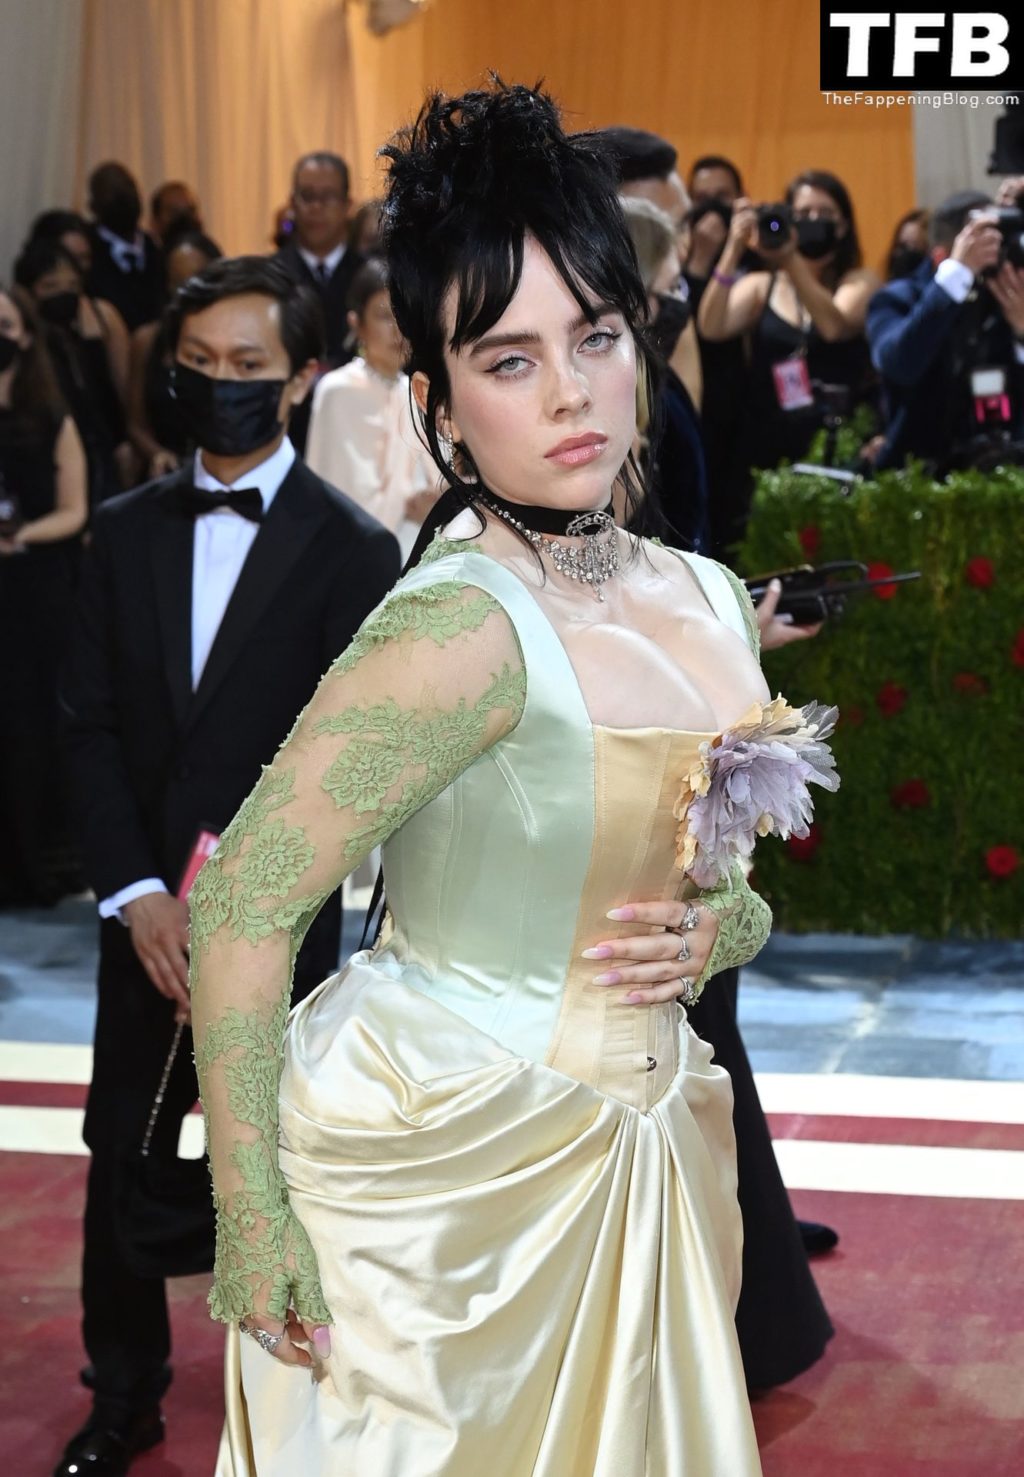 Billie Eilish Sexy The Fappening Blog 103 1024x1477 - Billie Eilish Showcases Nice Cleavage at The 2022 Met Gala in NYC (155 Photos)